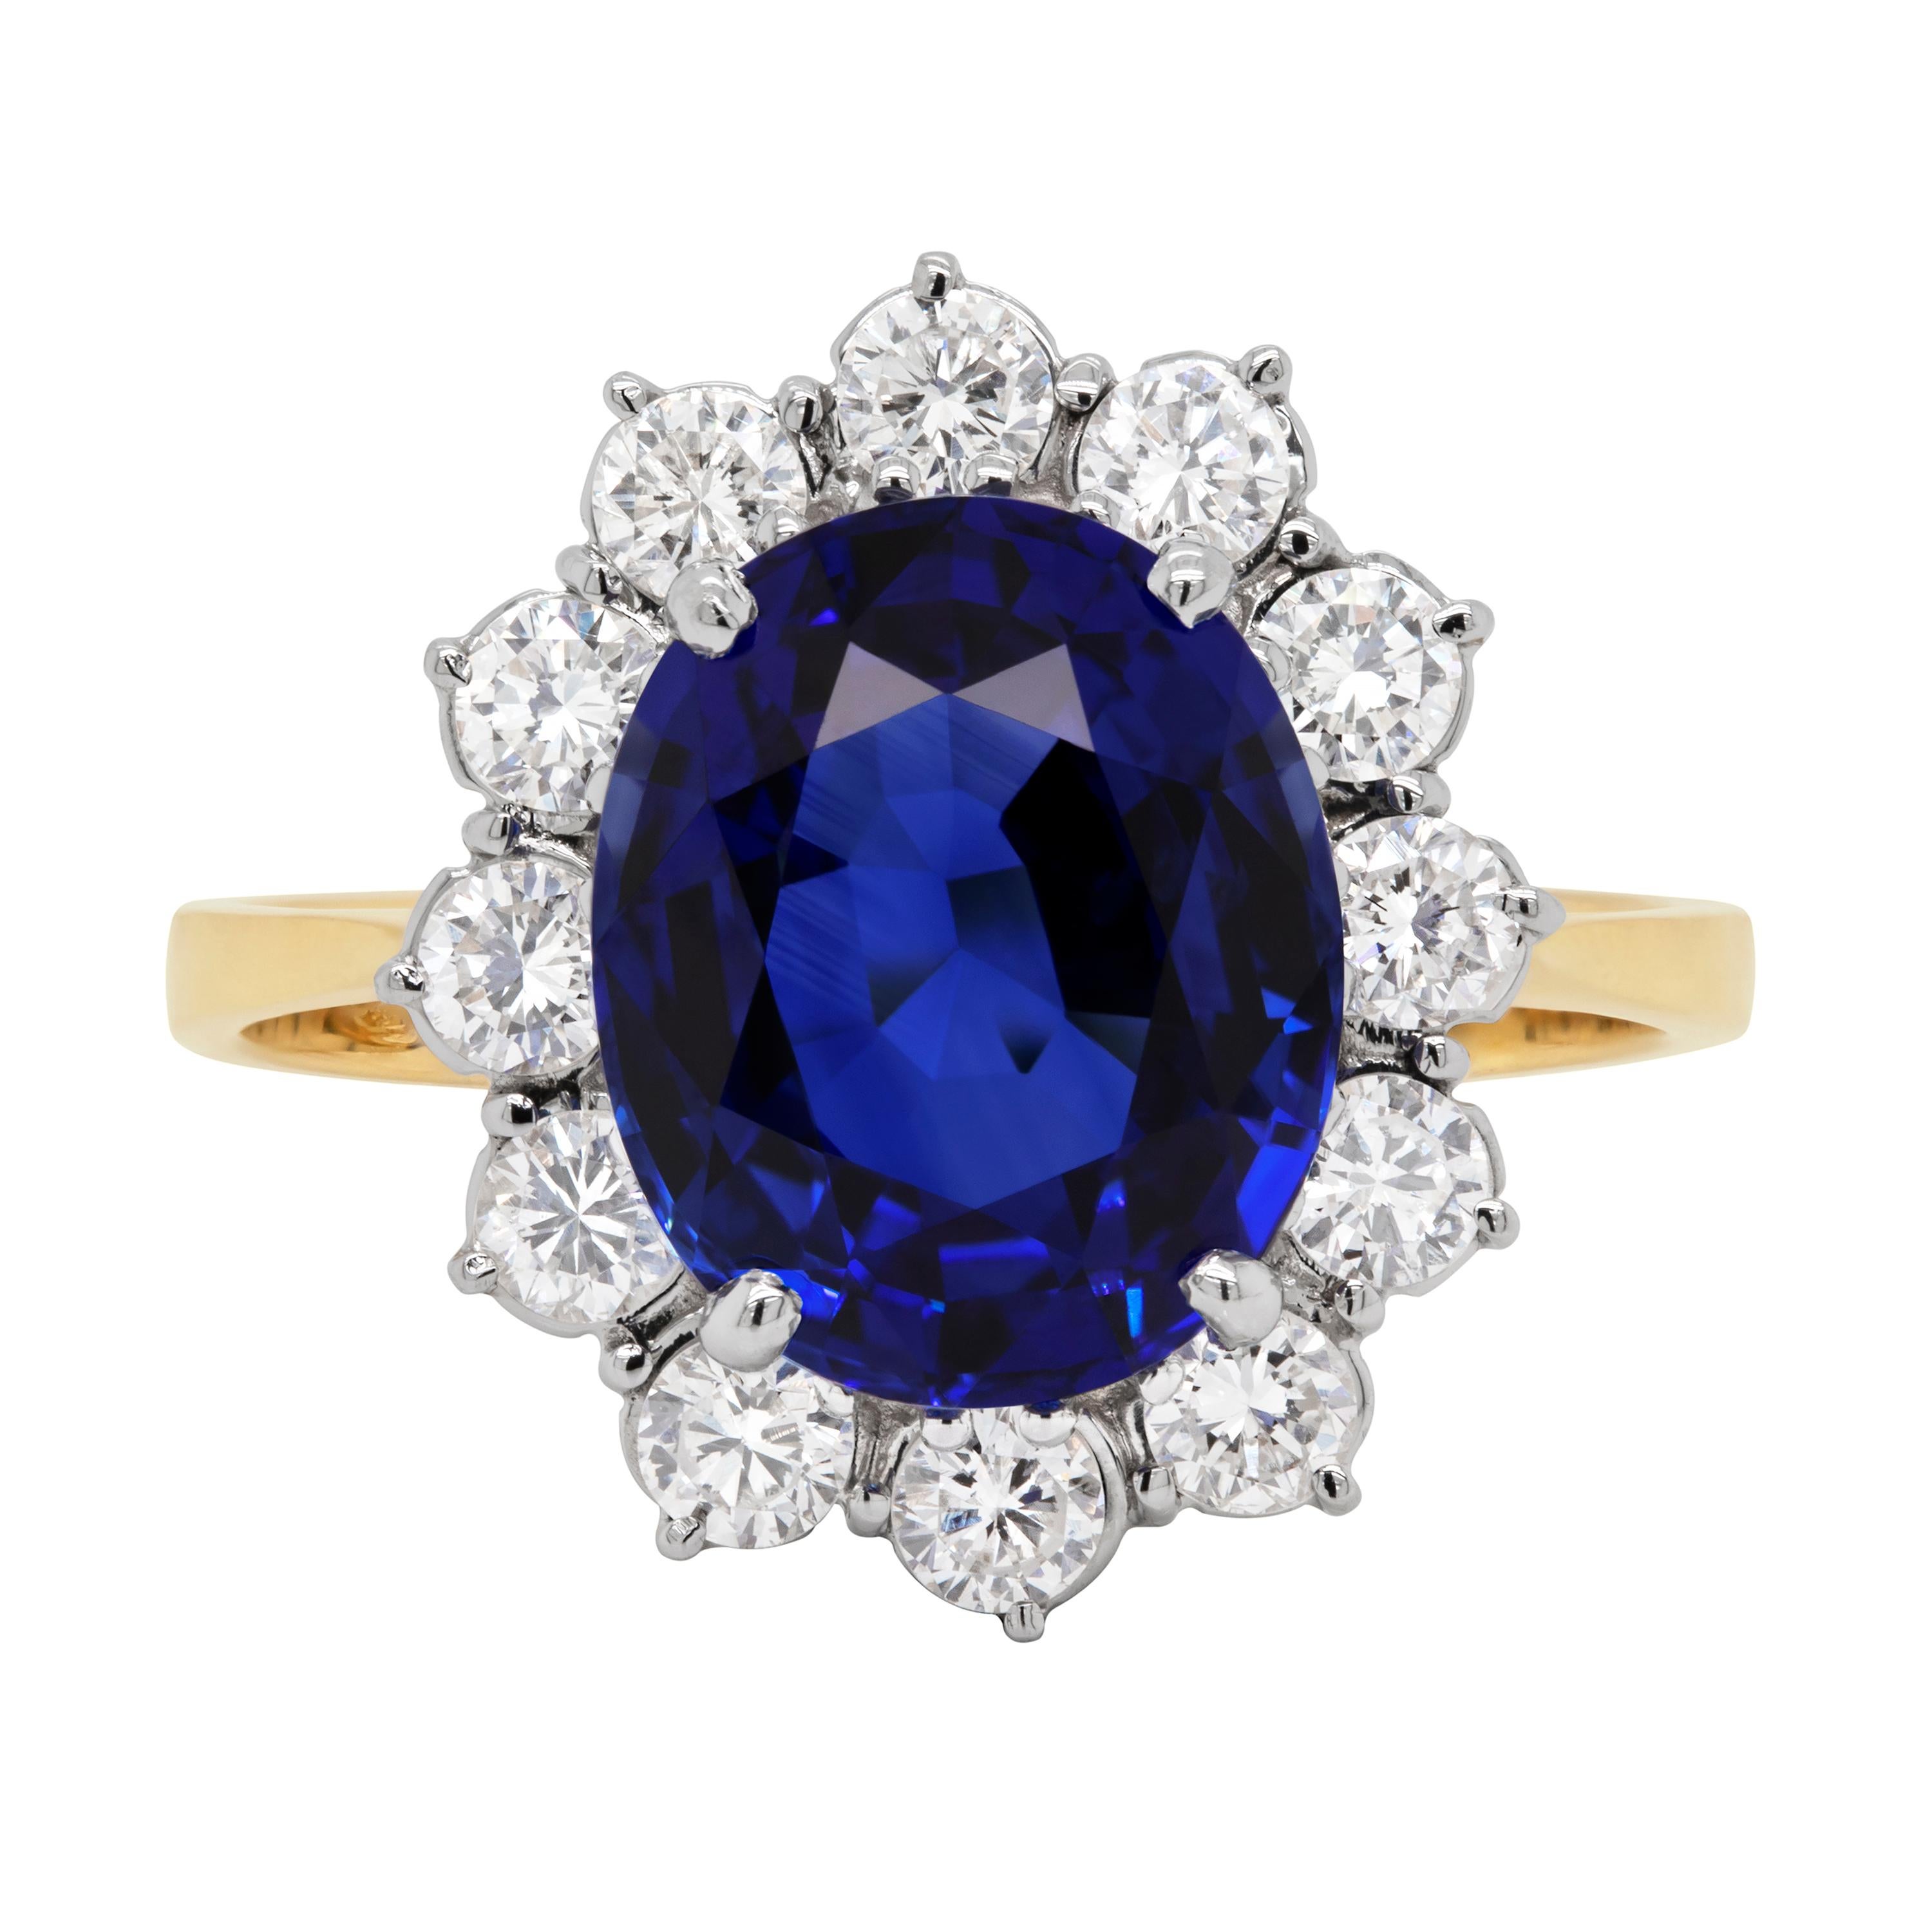 5.03 Carat Blue Sapphire and Diamond 18 Carat Gold Cluster Engagement Ring